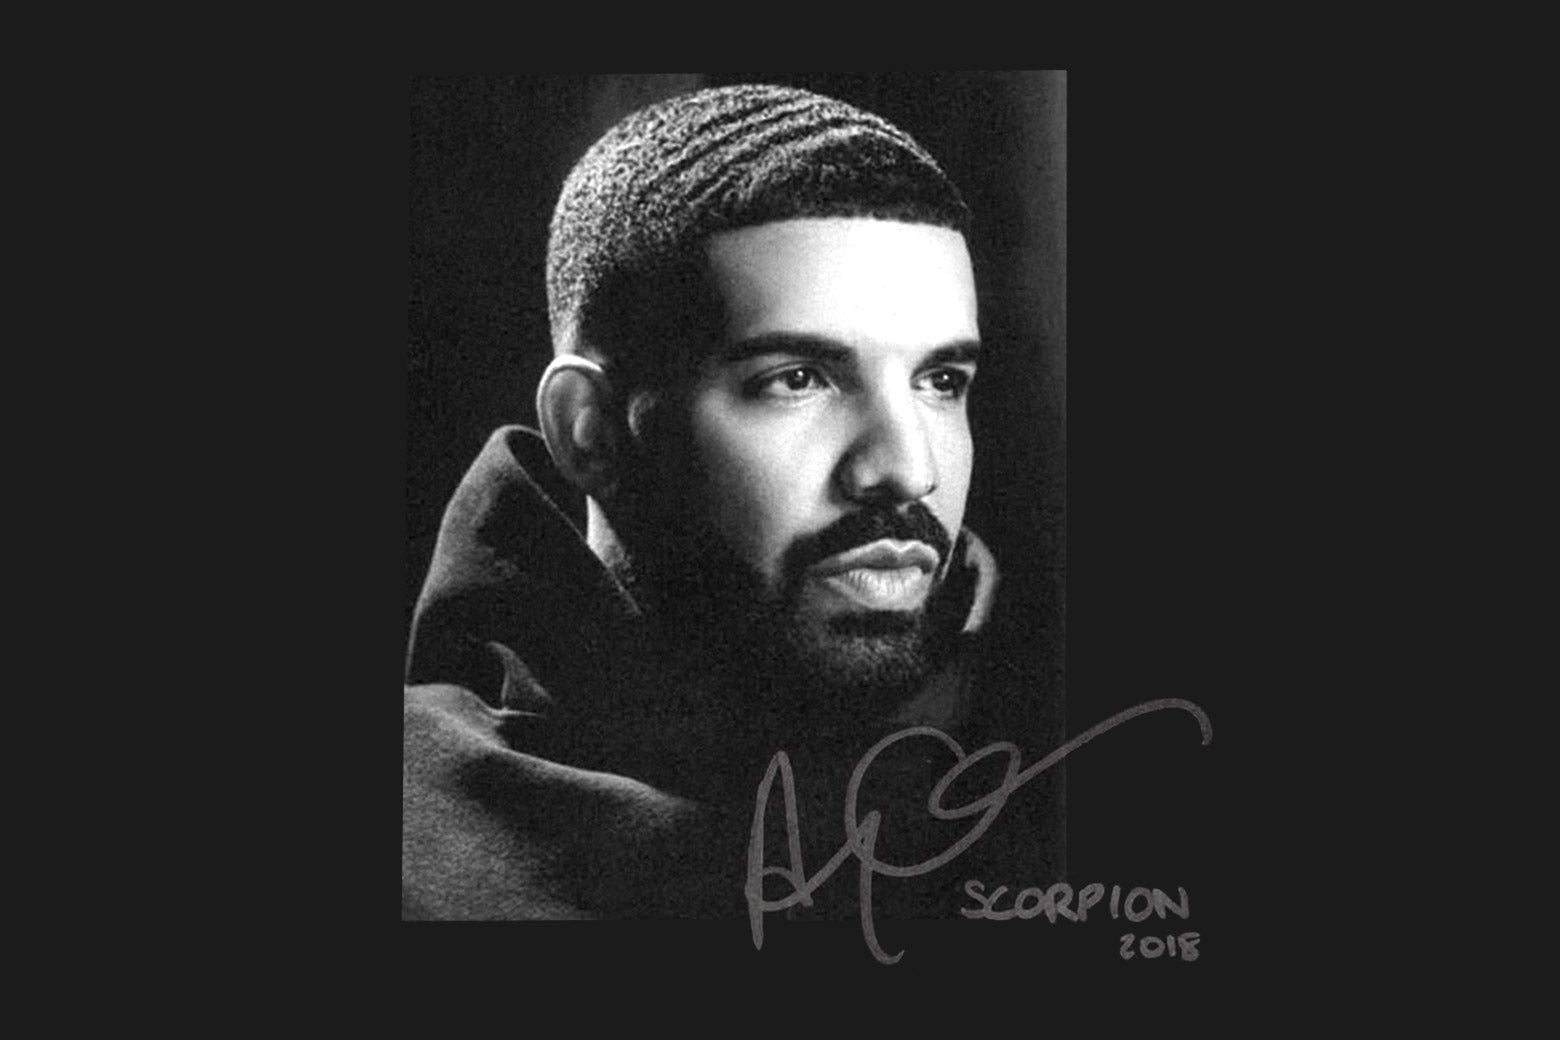 Drake looks off into the distance on the cover of his latest album, Scorpion.